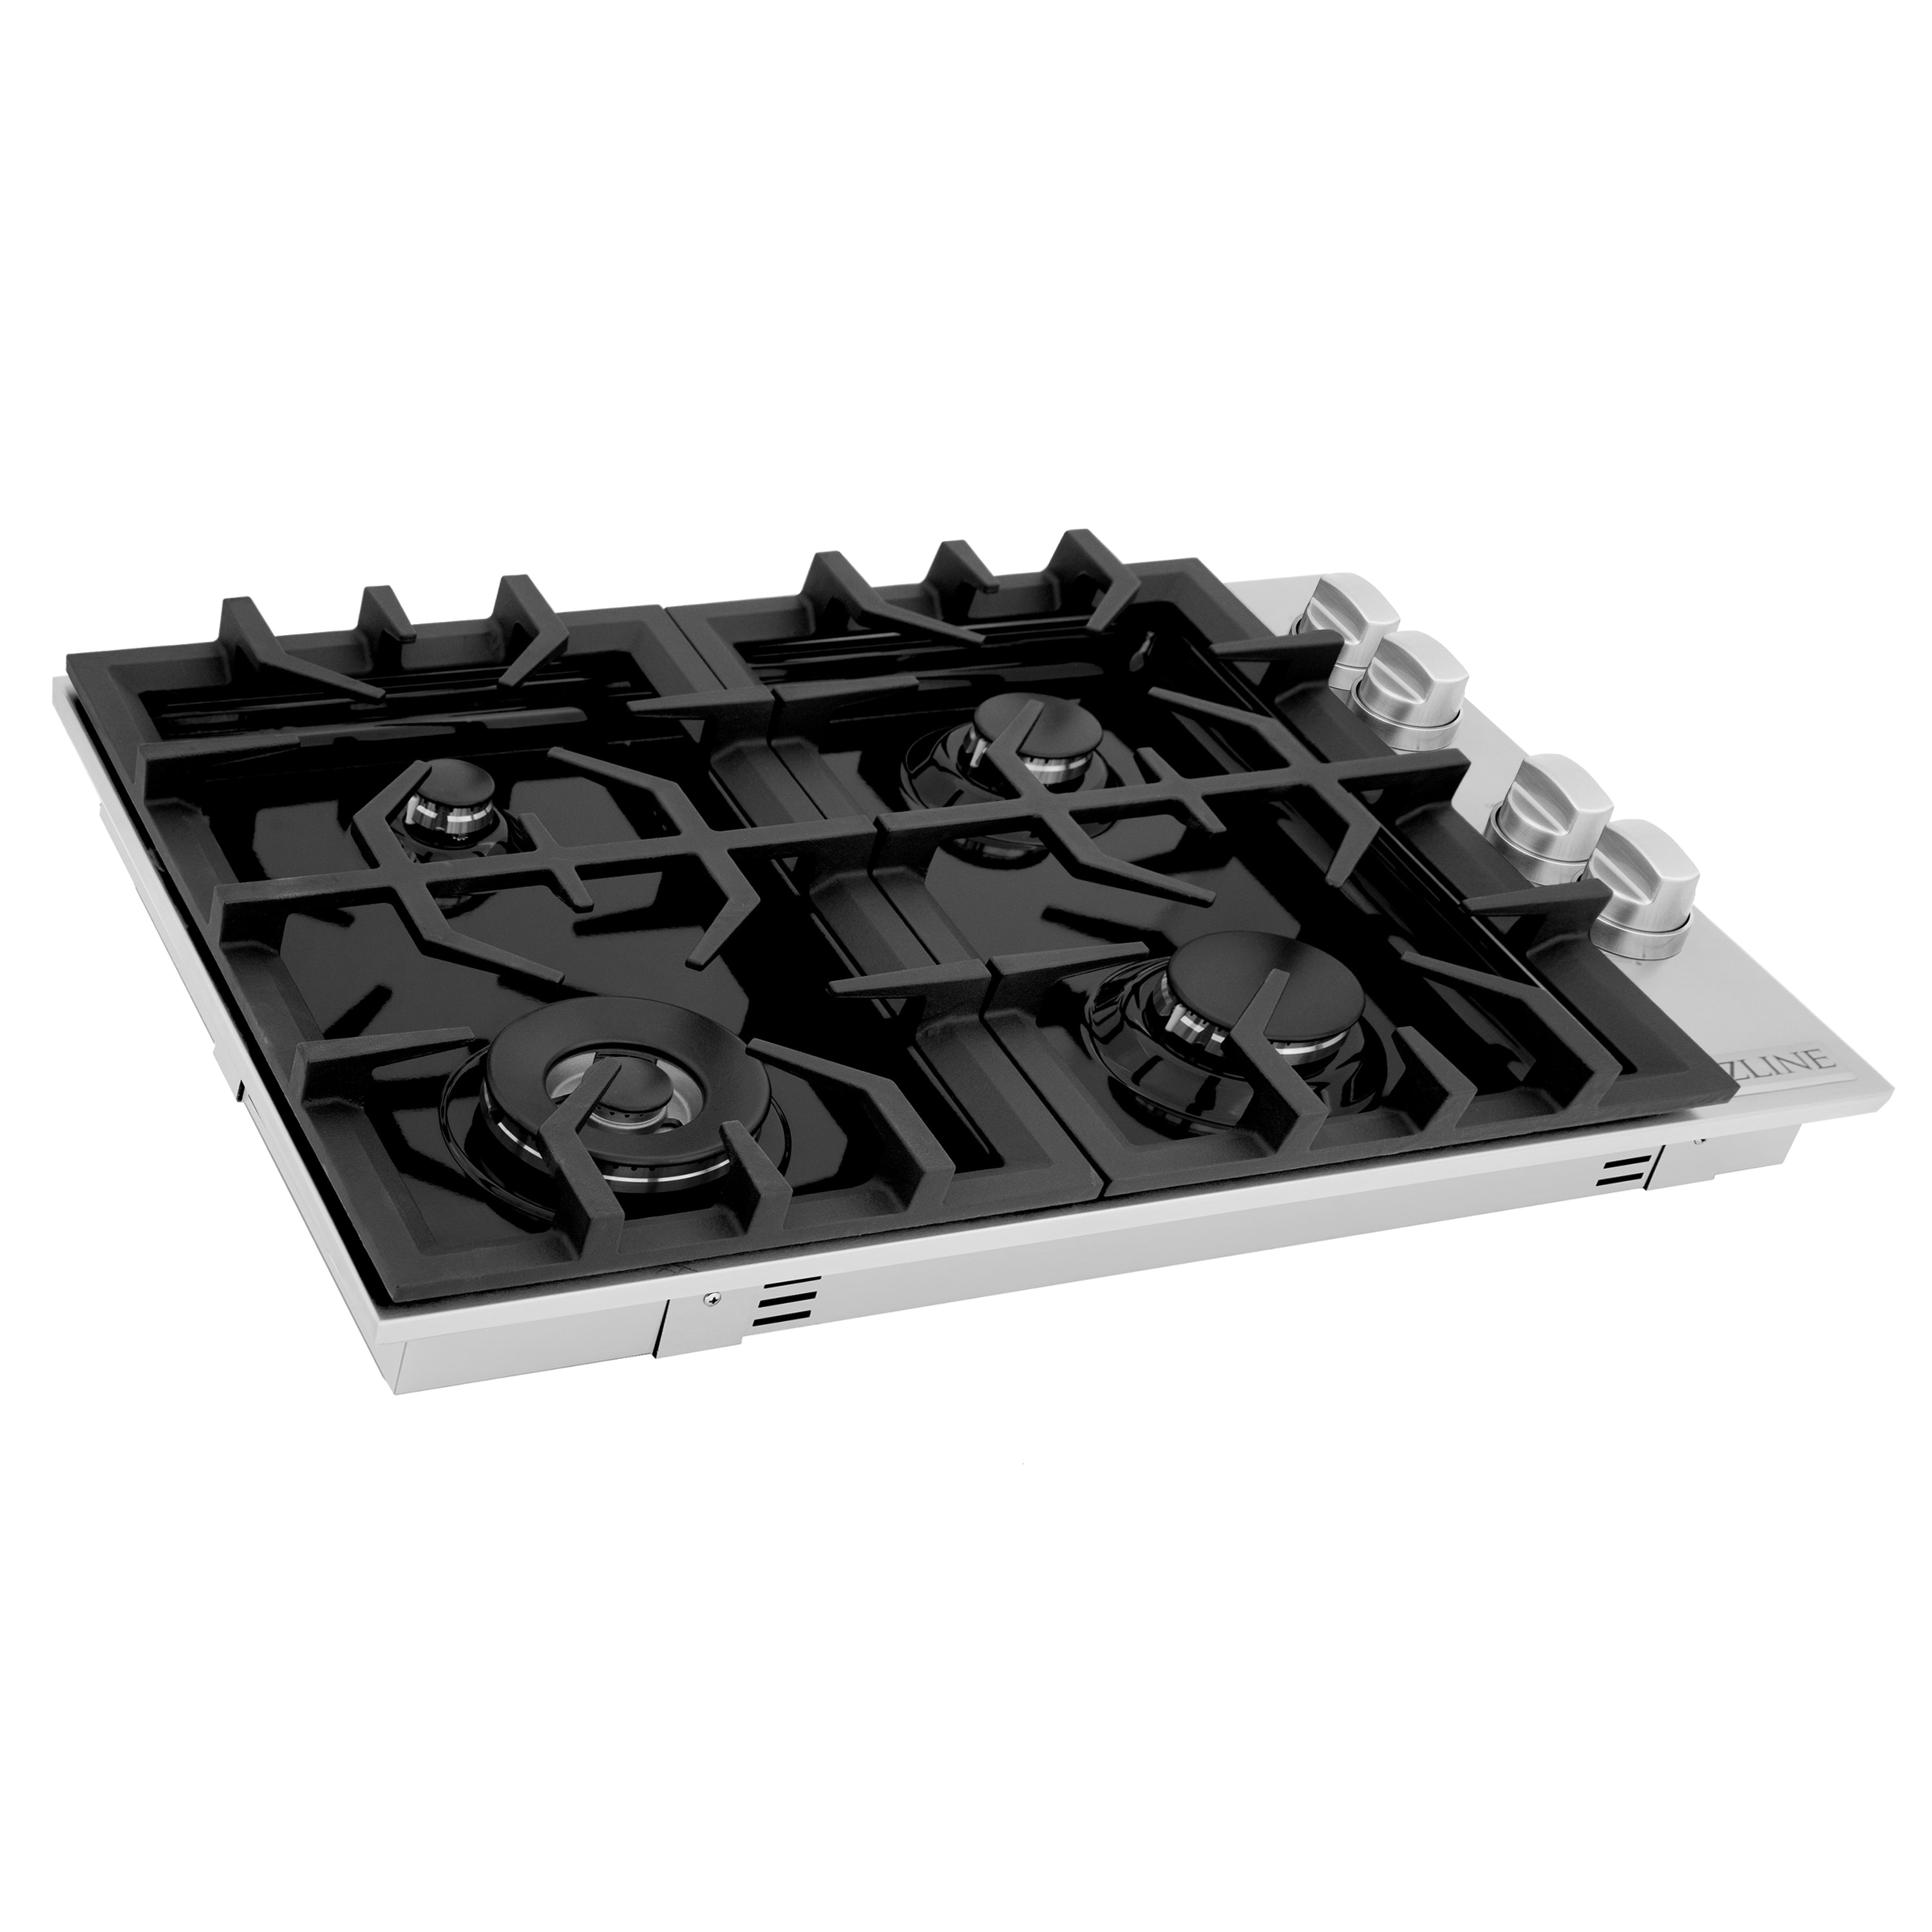 ZLINE 30" Gas Cooktop with 4 Gas Burners and Black Porcelain Top (RC30-PBT)